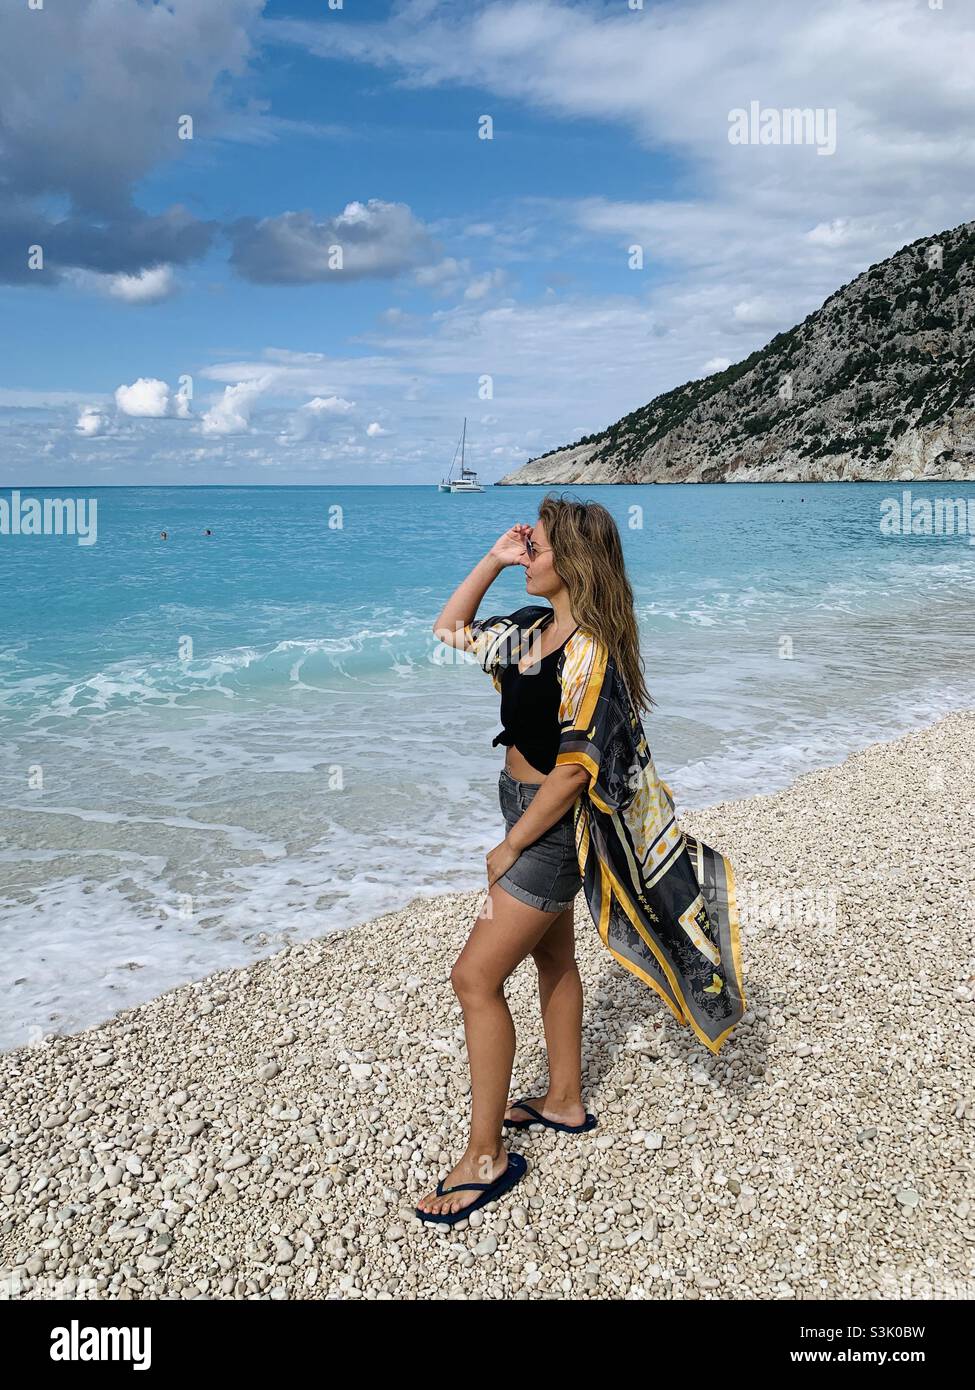 Woman looking out to sea at Myrtos beach kefalonia Stock Photo